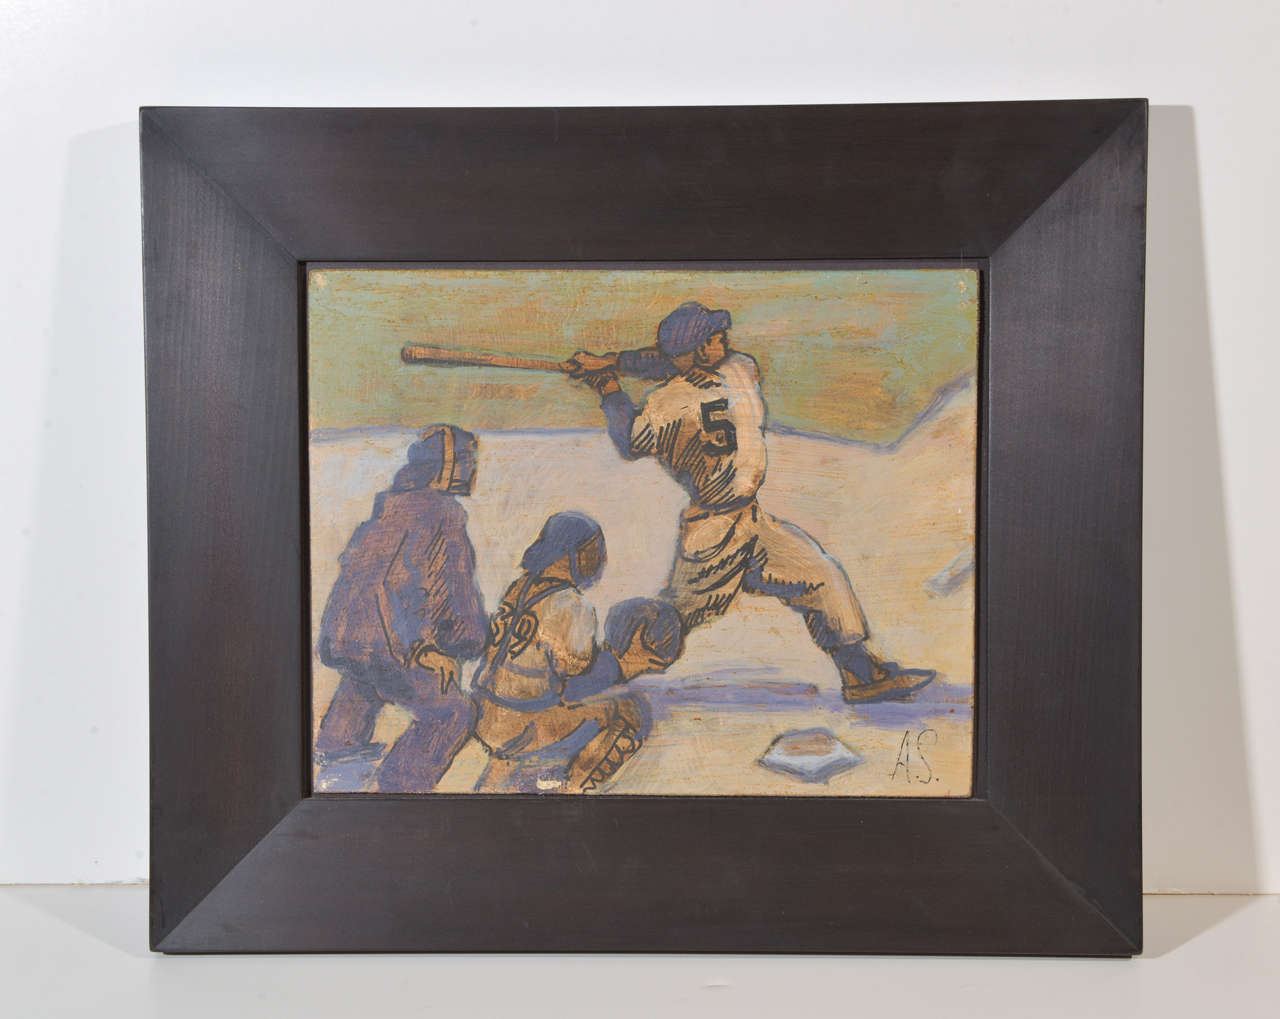 Oil/ink on board depiction of Joltin' Joe's HR in the decisive game 5 Yankee win.  Attributed to Arthur Smith, signed A. S. (see disclaimer BELOW).
Smith is collectable primarily for his depictions of vintage Boxing and Baseball works.  This is a